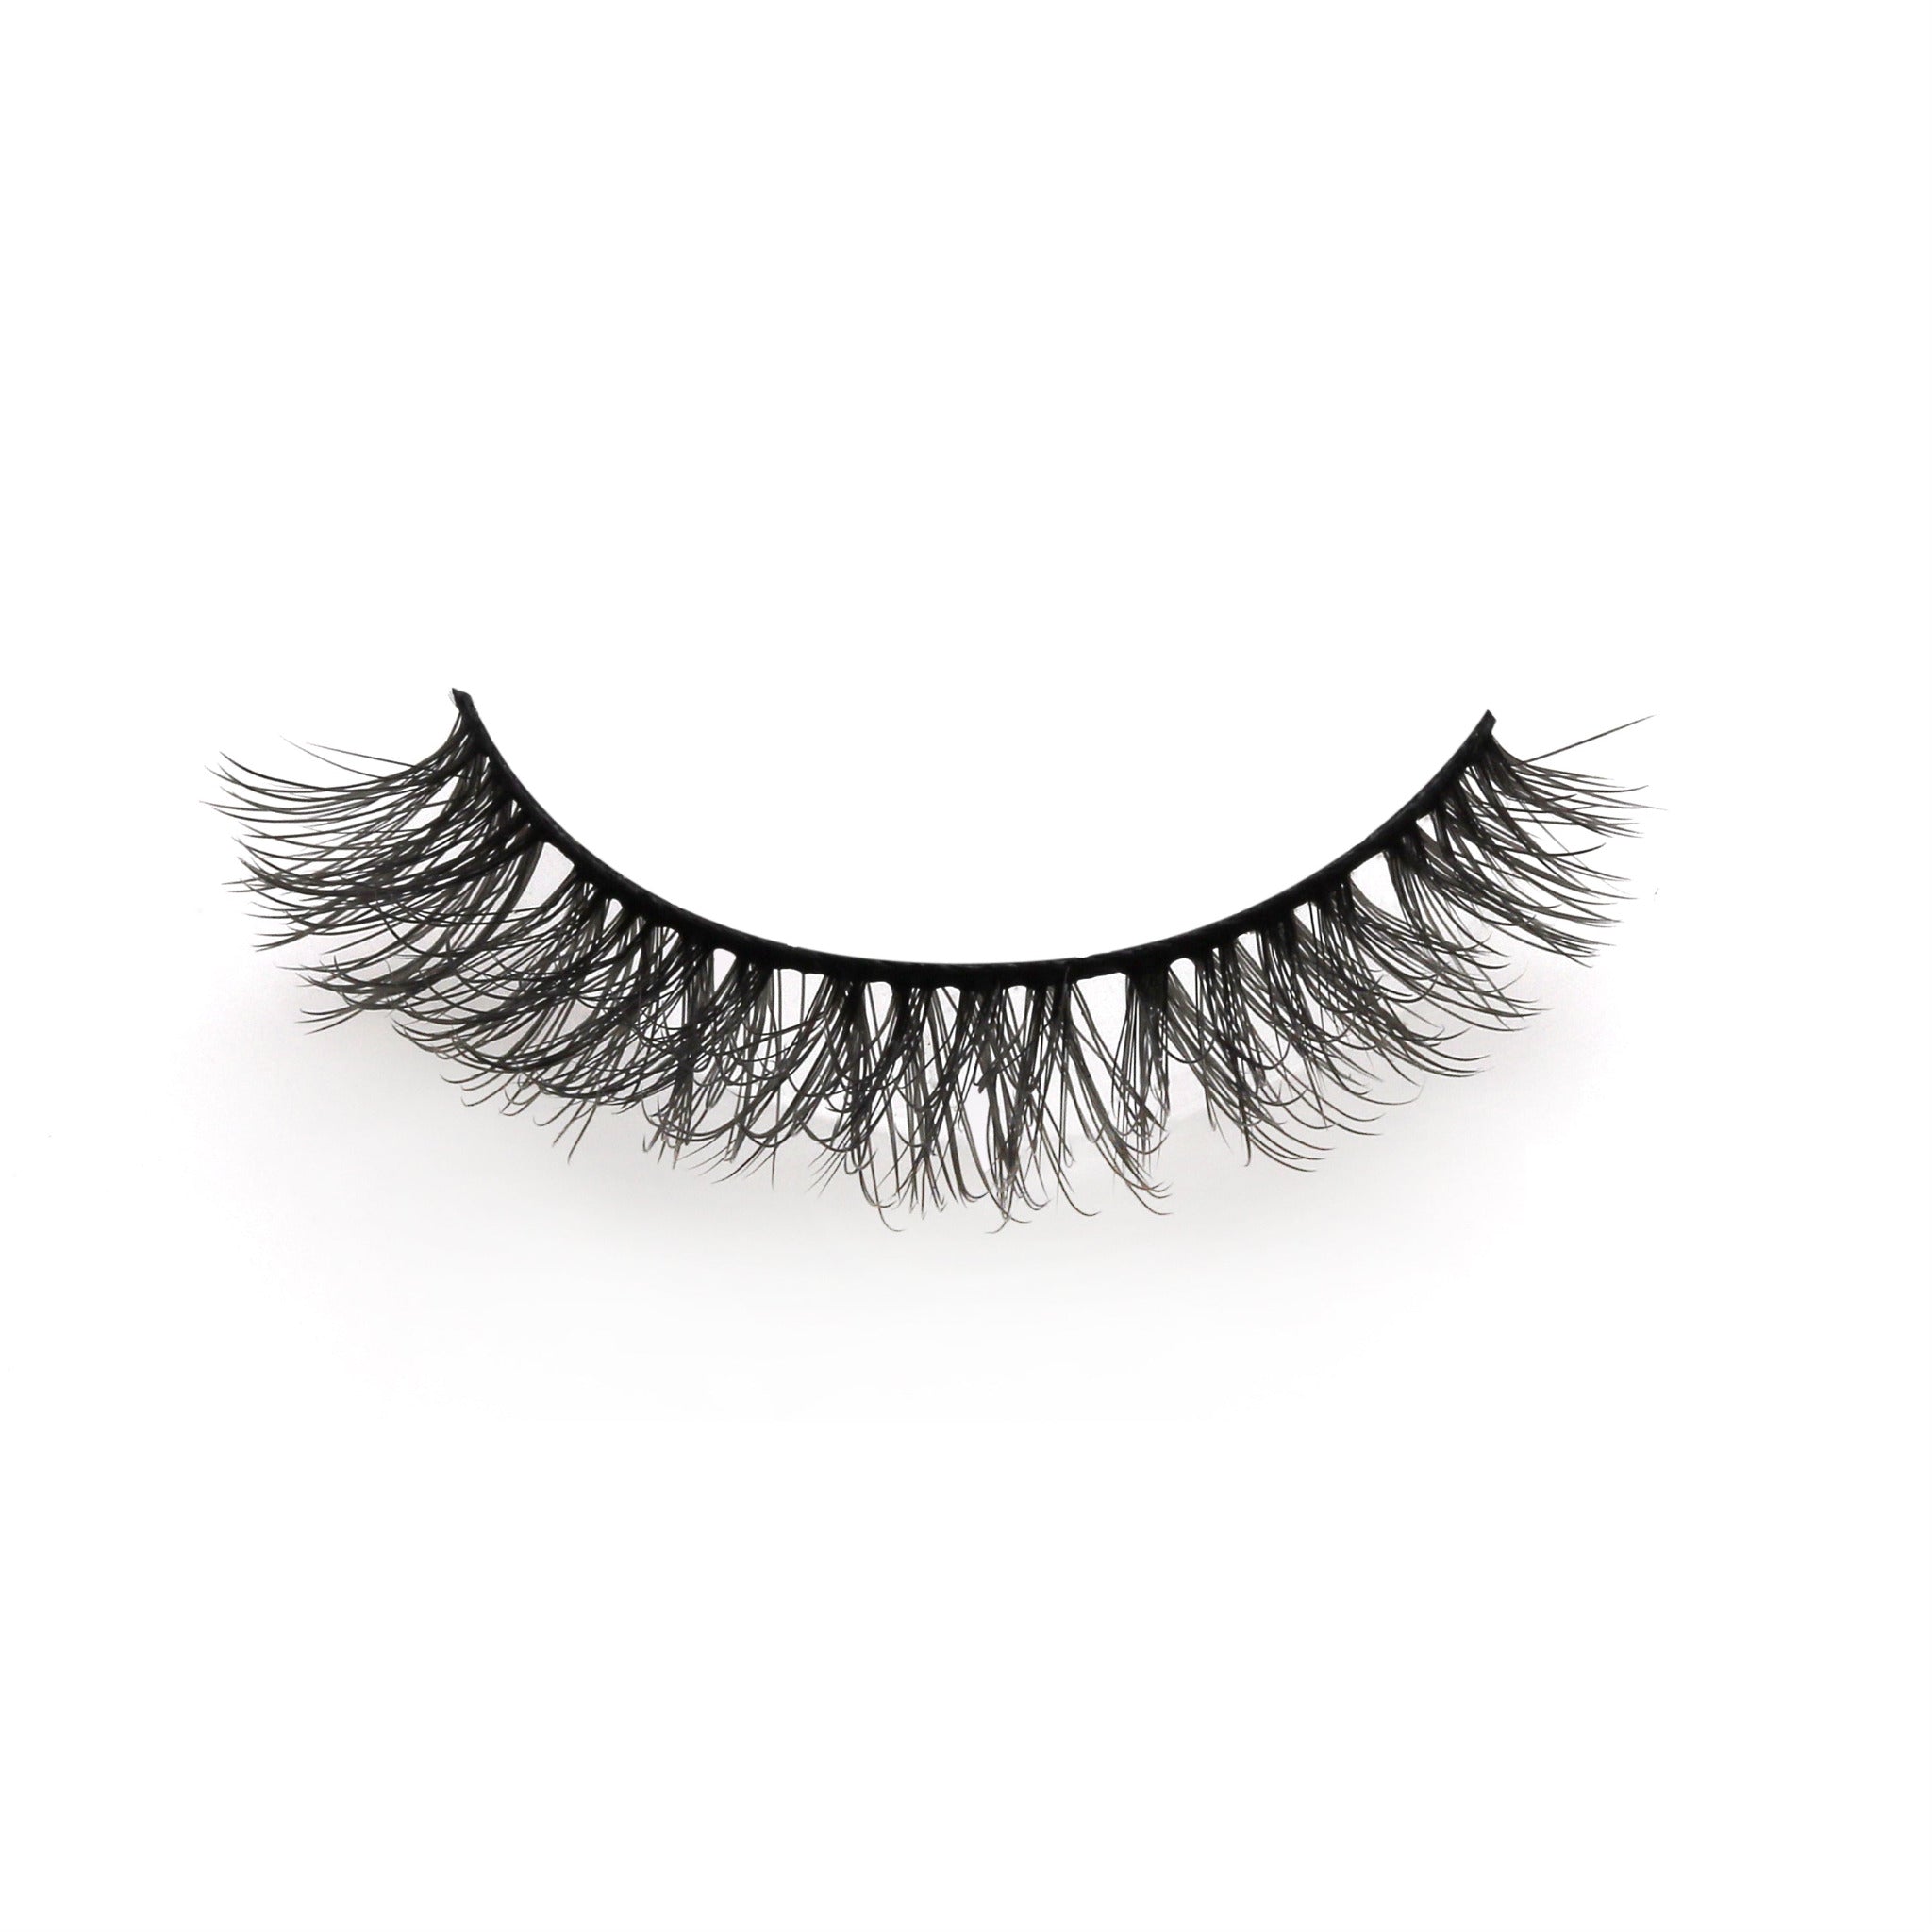 reusable false lashes, vegan lashes, hand made lashes, strip lashes, false eyelashes, natural strip lash look, high quality strip lashes, volume style strip lashes, luxurious strip lashes, Biodegradable lashes